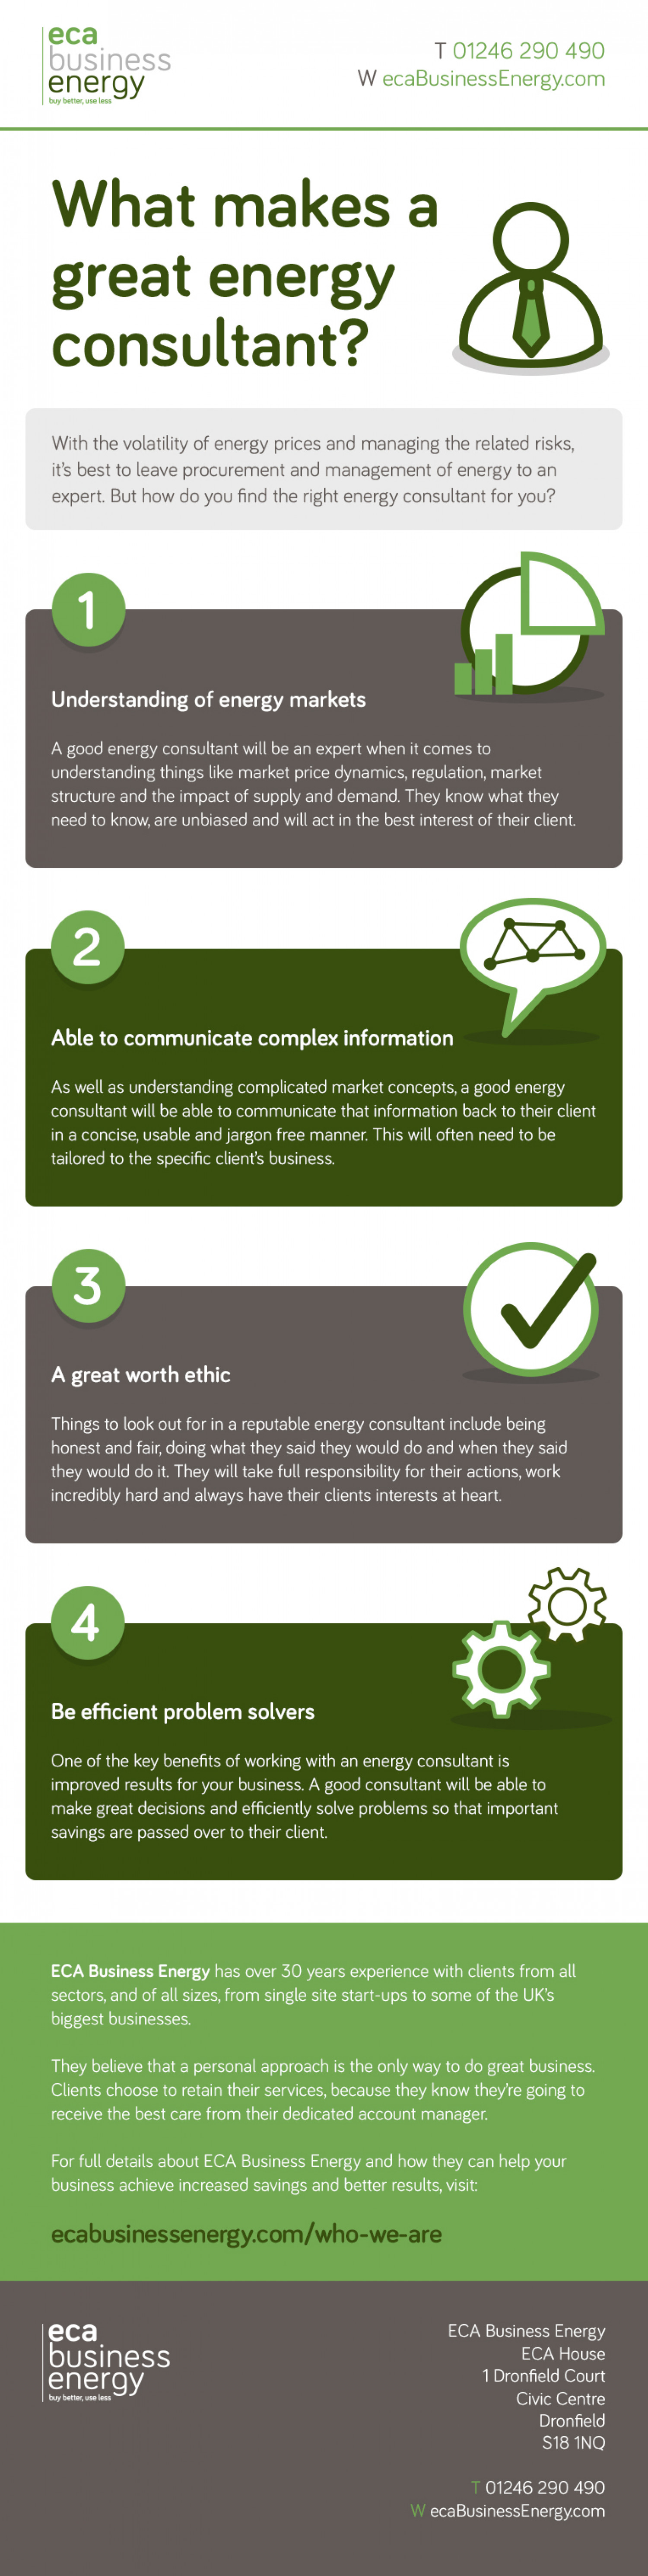 What Makes a Great Energy Consultant? Infographic